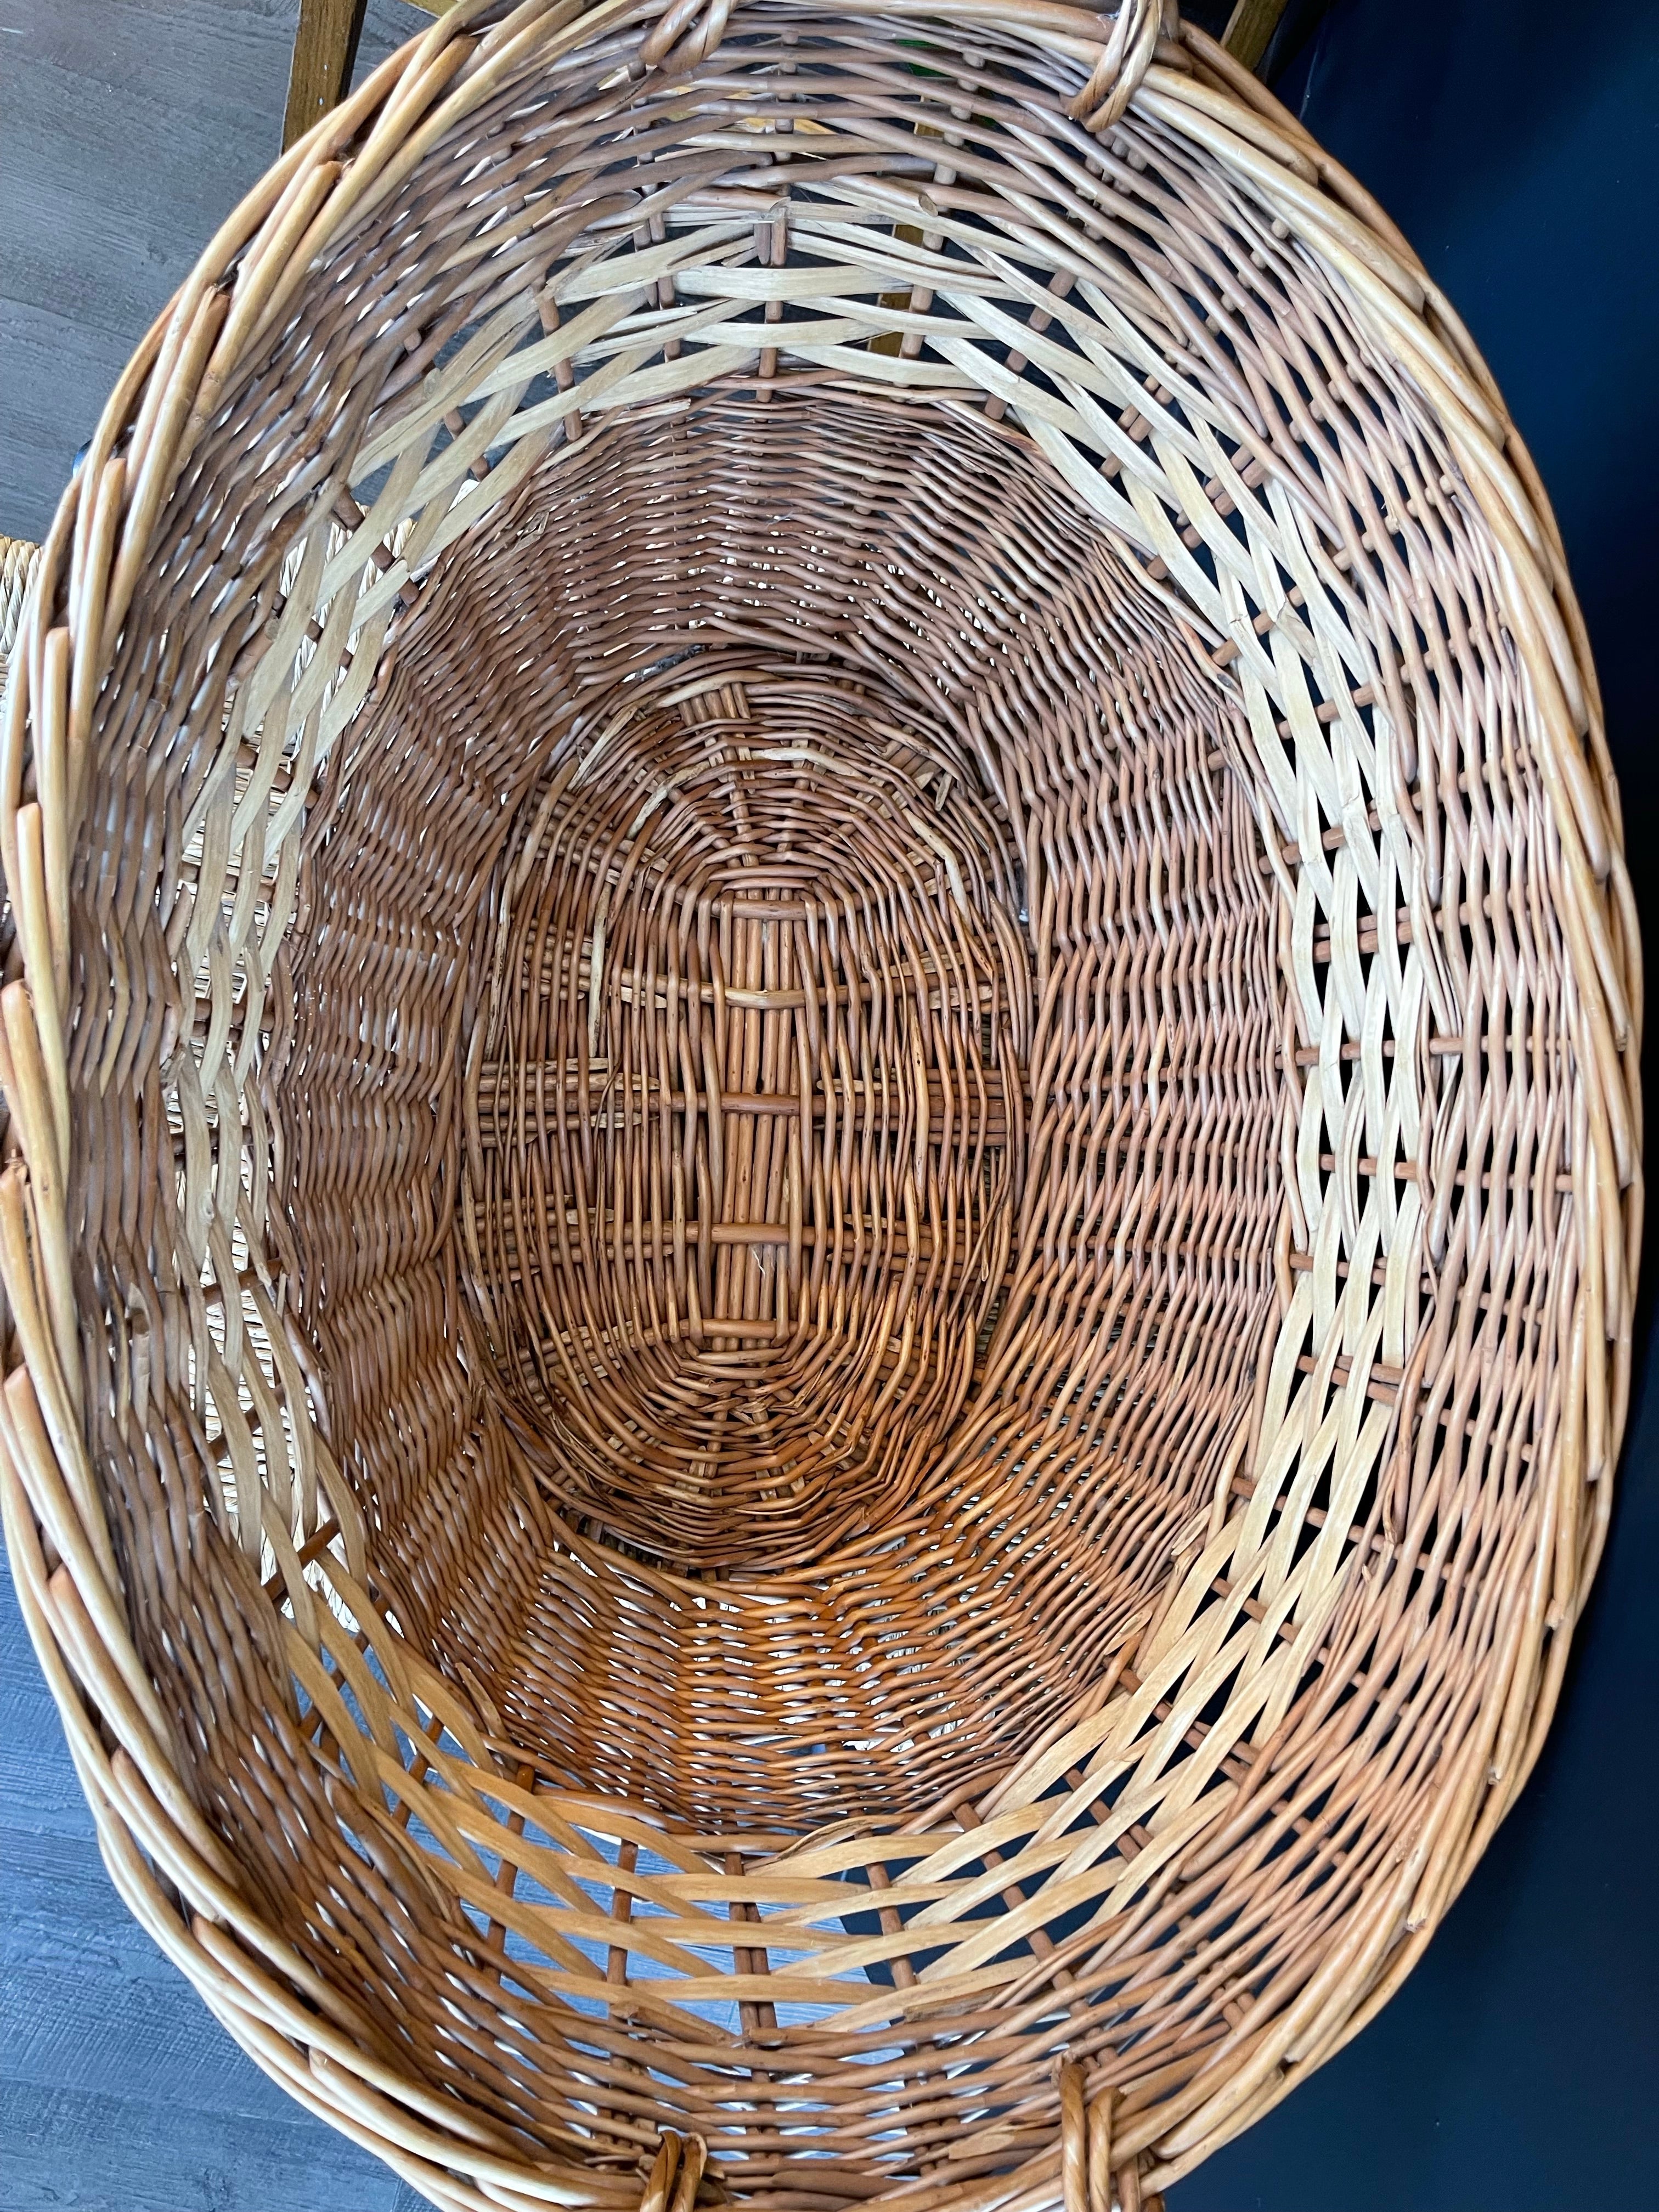 Vintage Large Laundry Basket with Handles